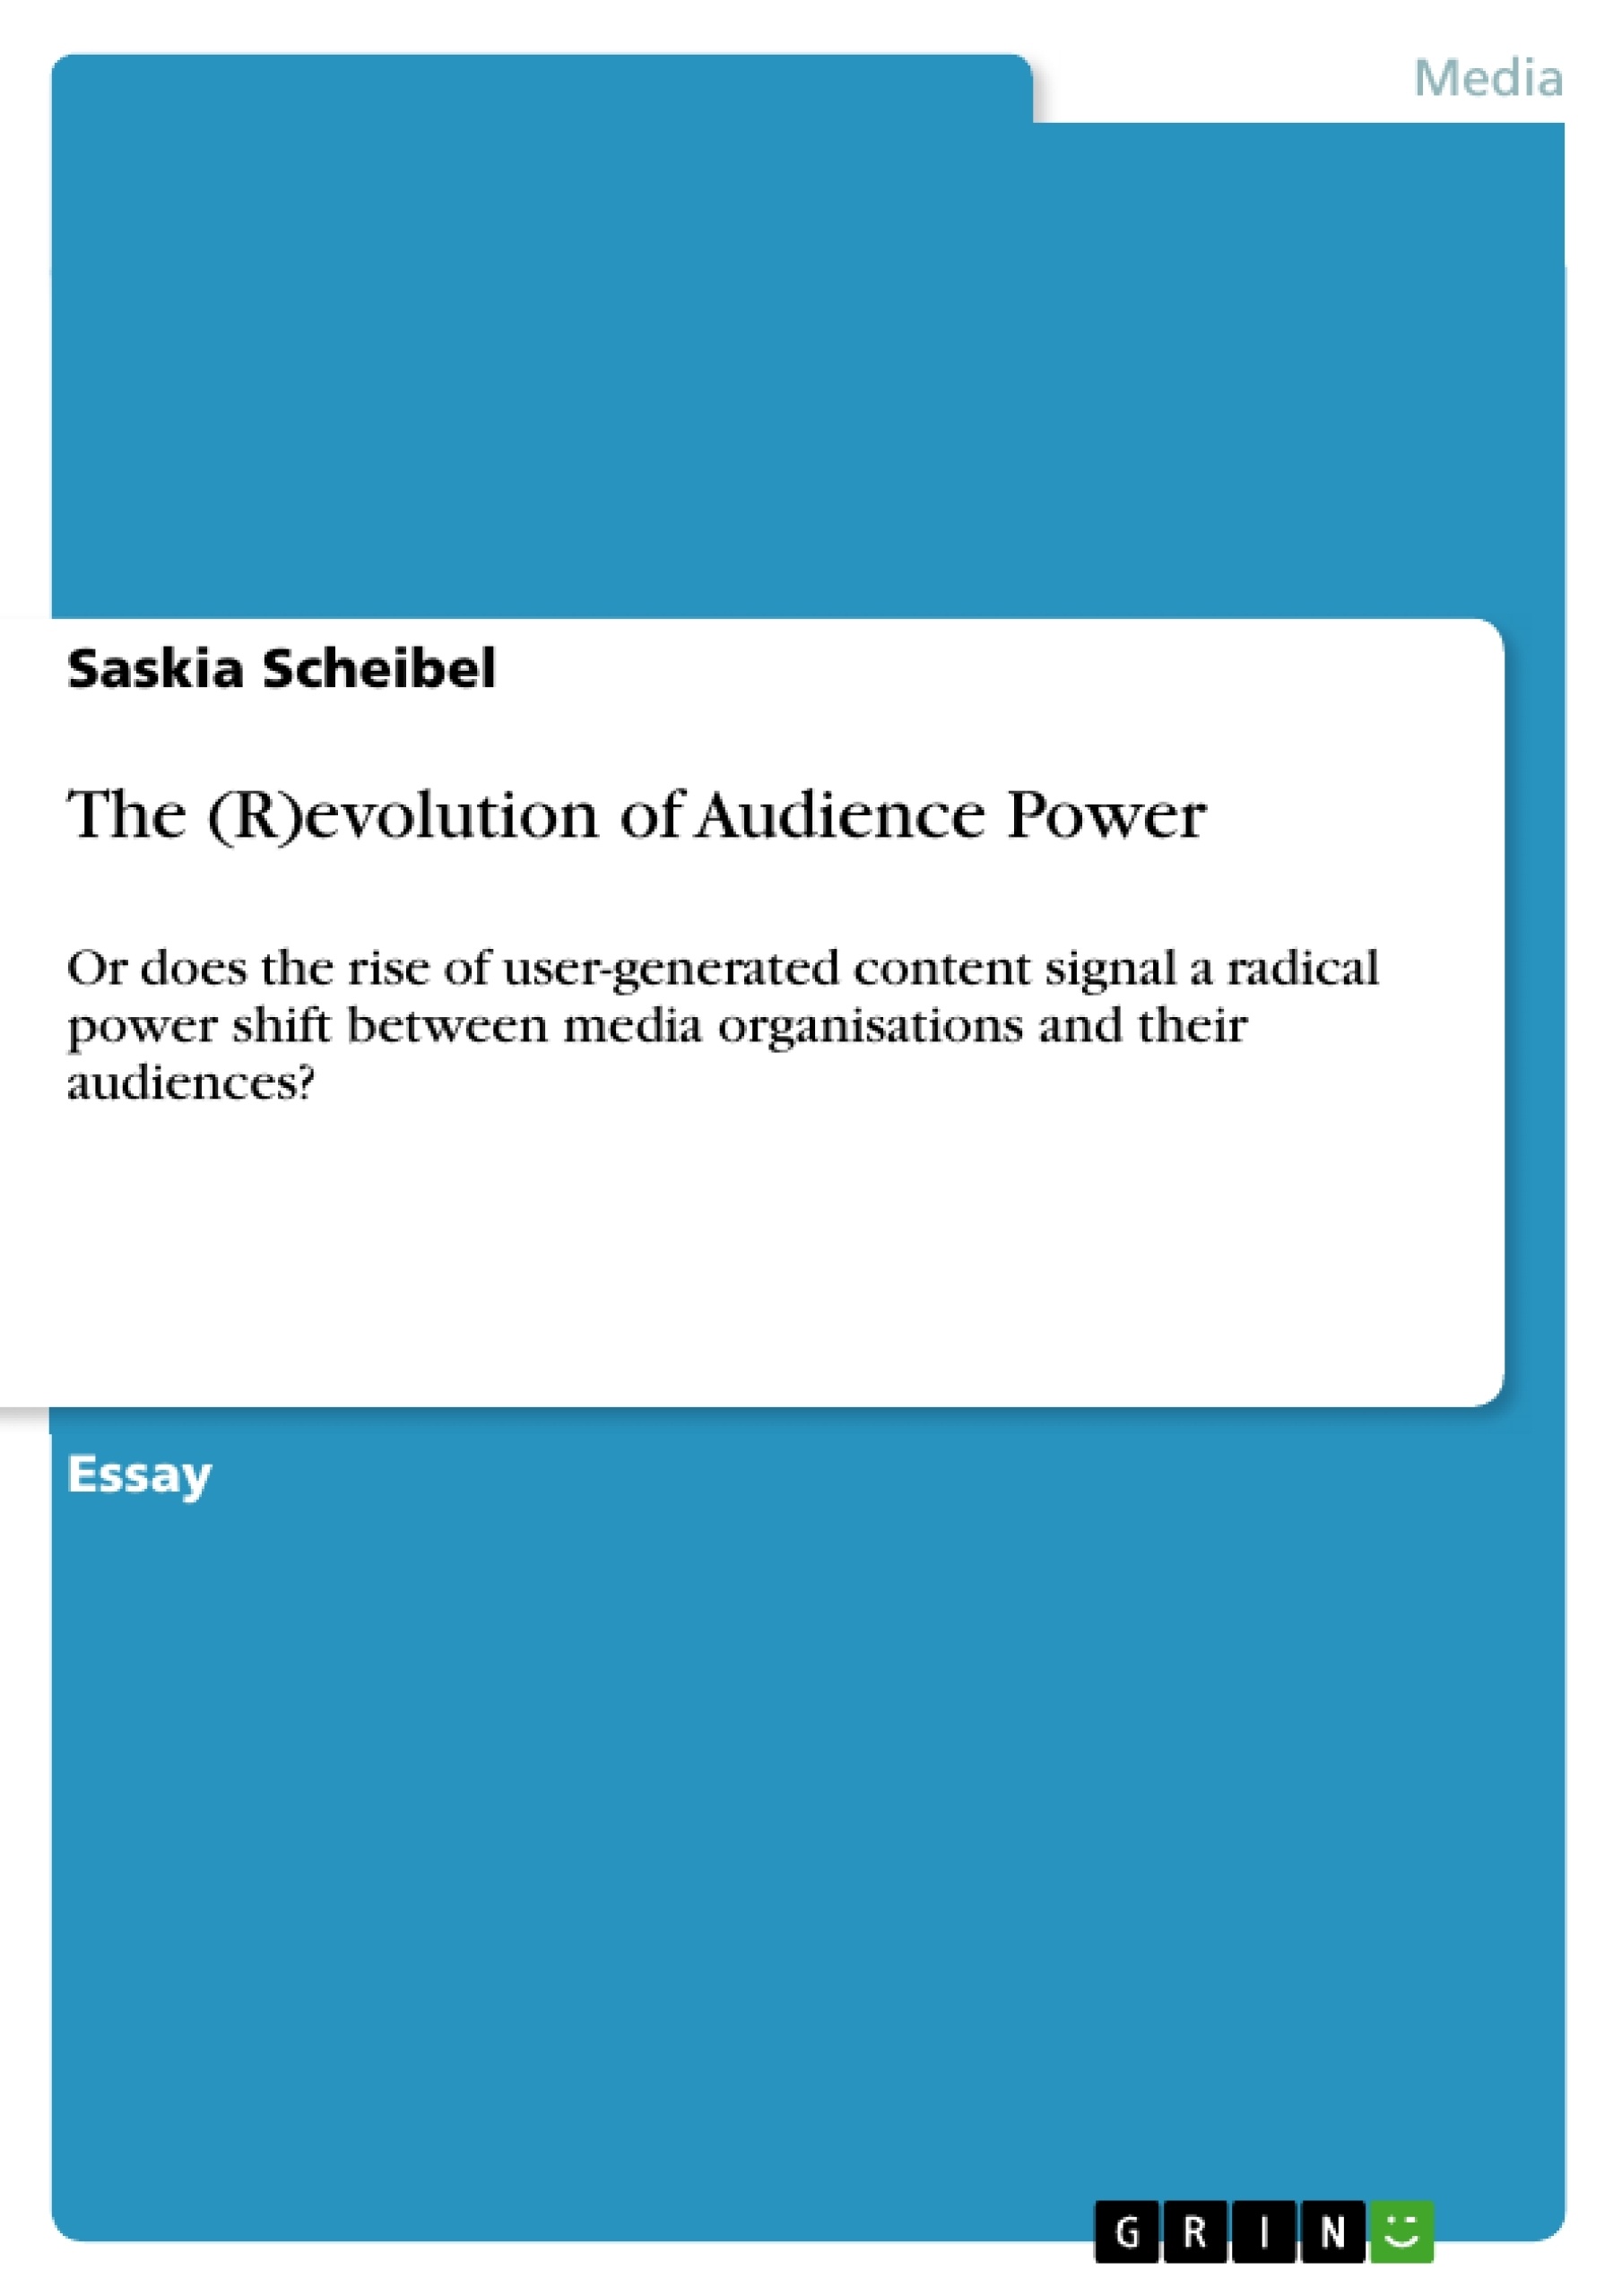 Title: The (R)evolution of Audience Power